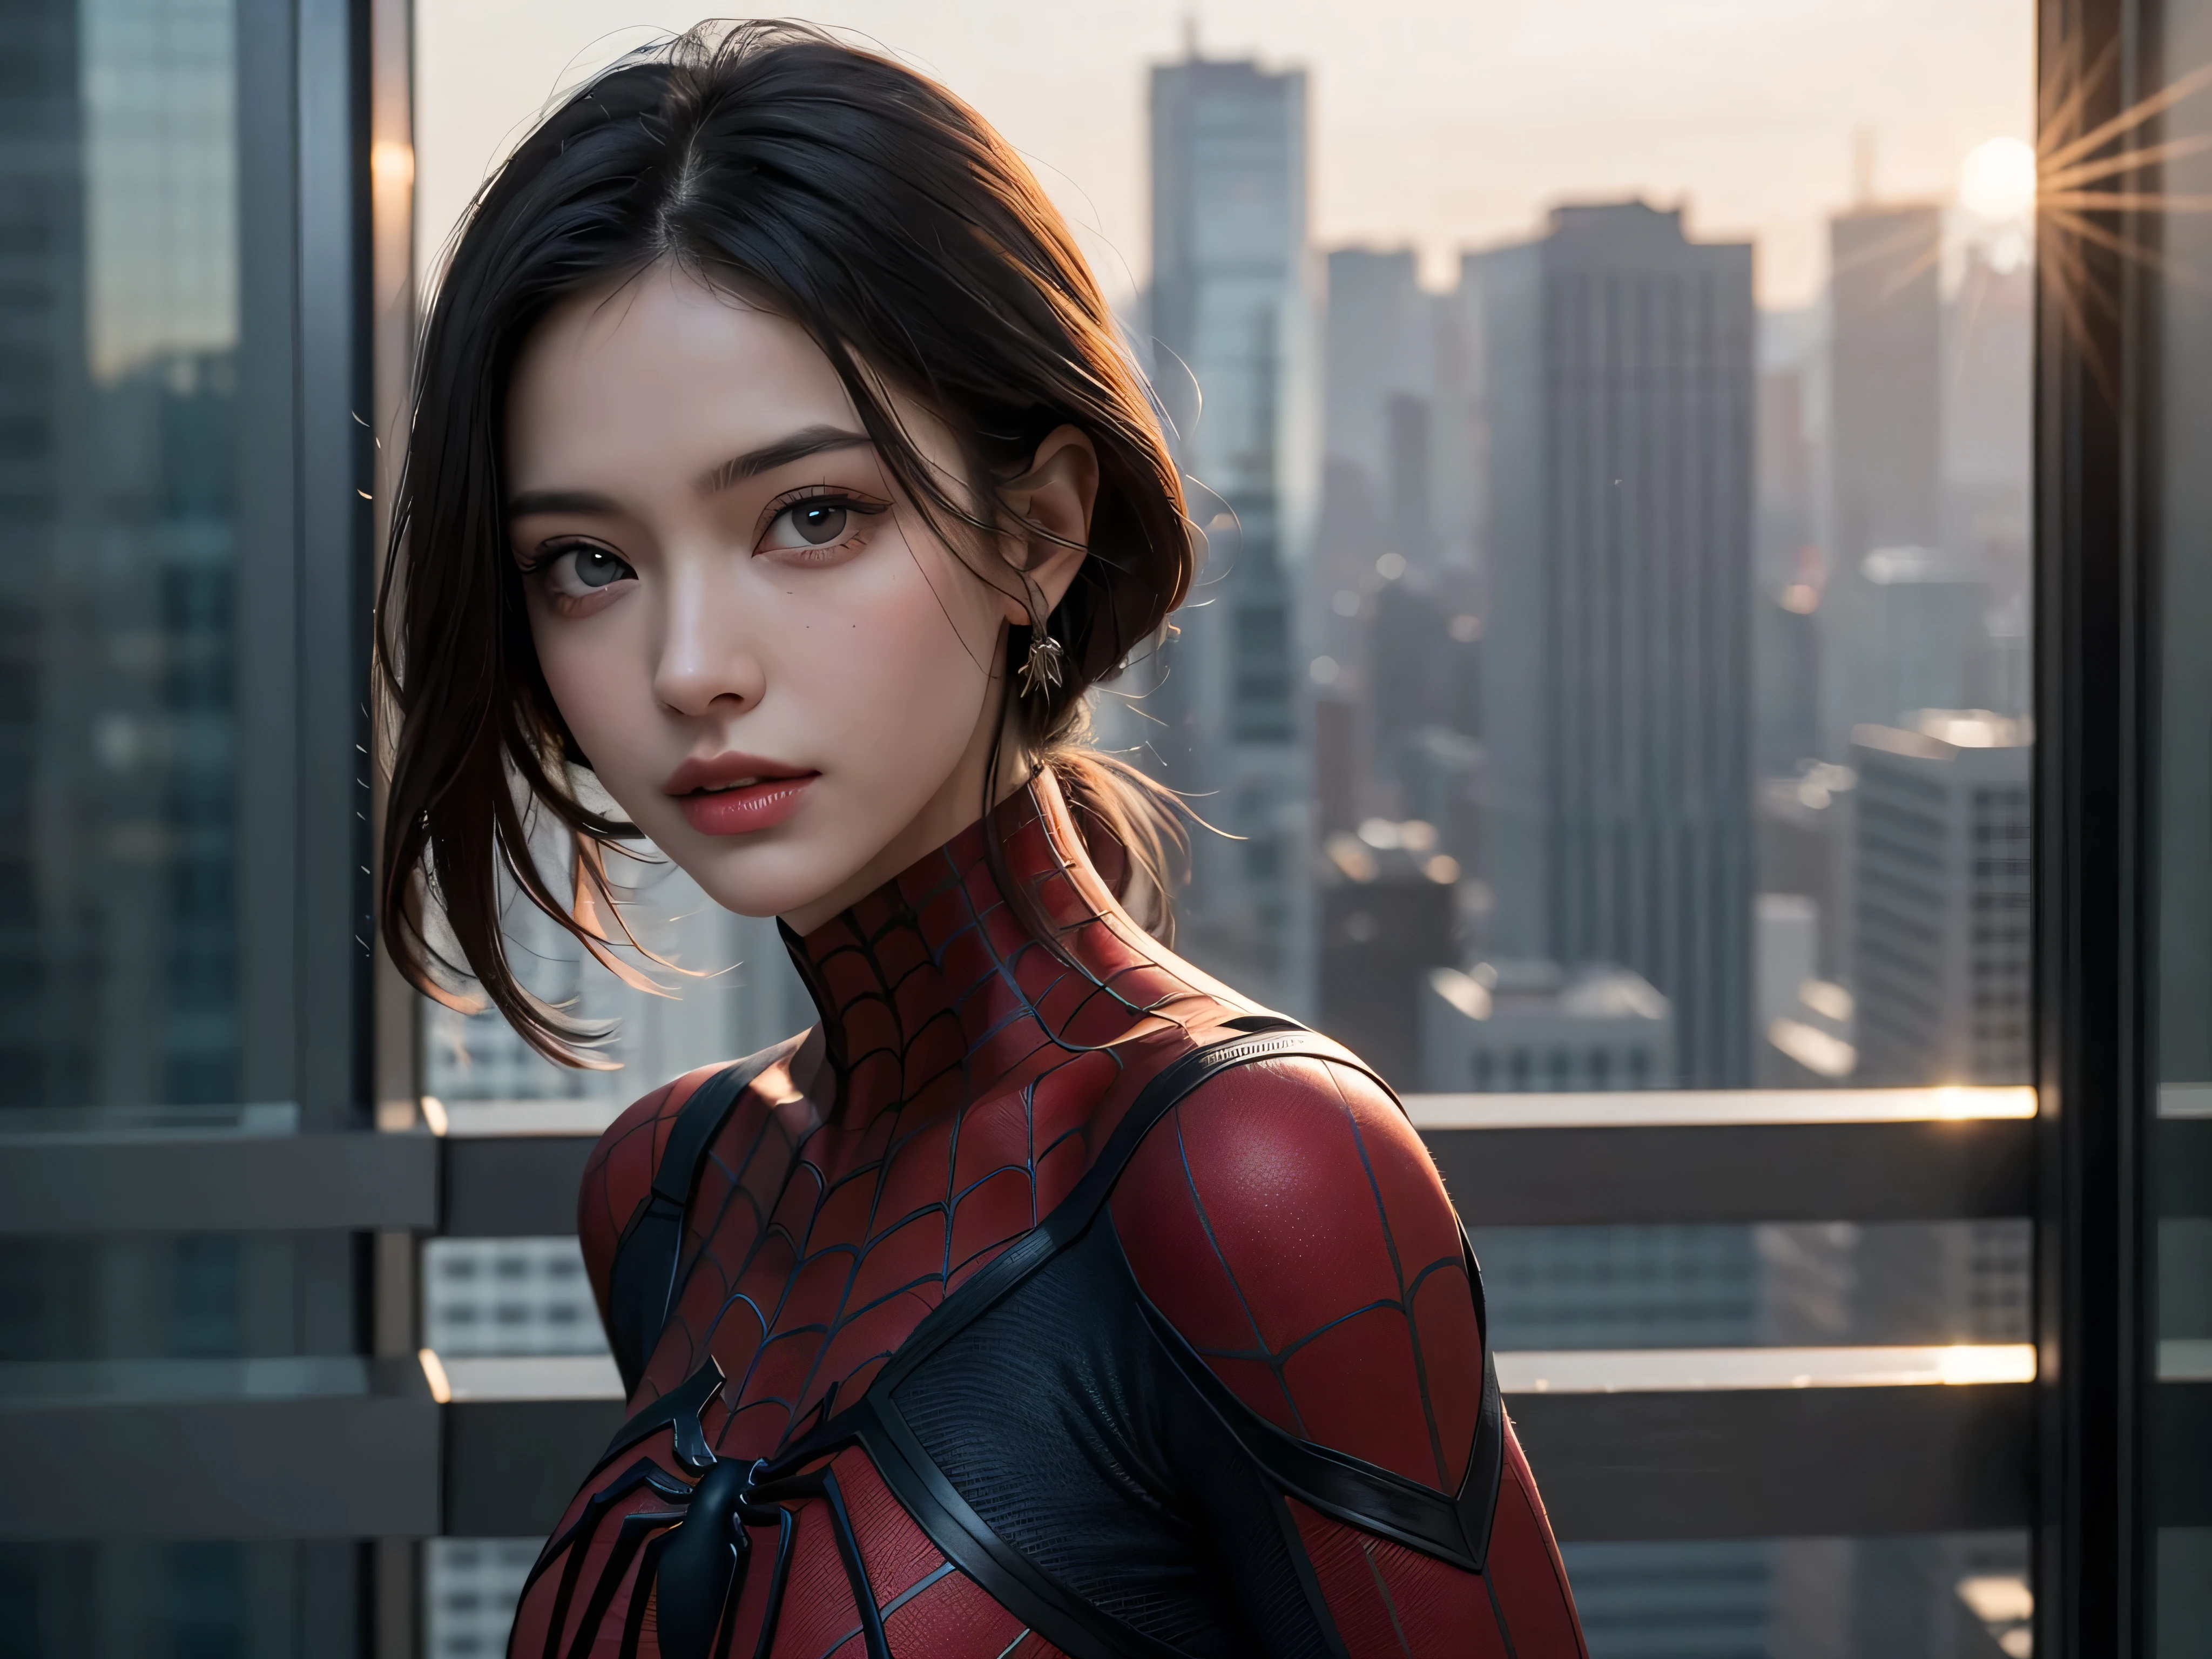 ((best quality)), ((masterpiece)), (detailed), woman 40 years old, She wears Spider-Man suit, ((Very detailed eyes and face)))), super beautiful body, she is giant and taller than the skyscrapers on both Her sides, the sun is at sunrise